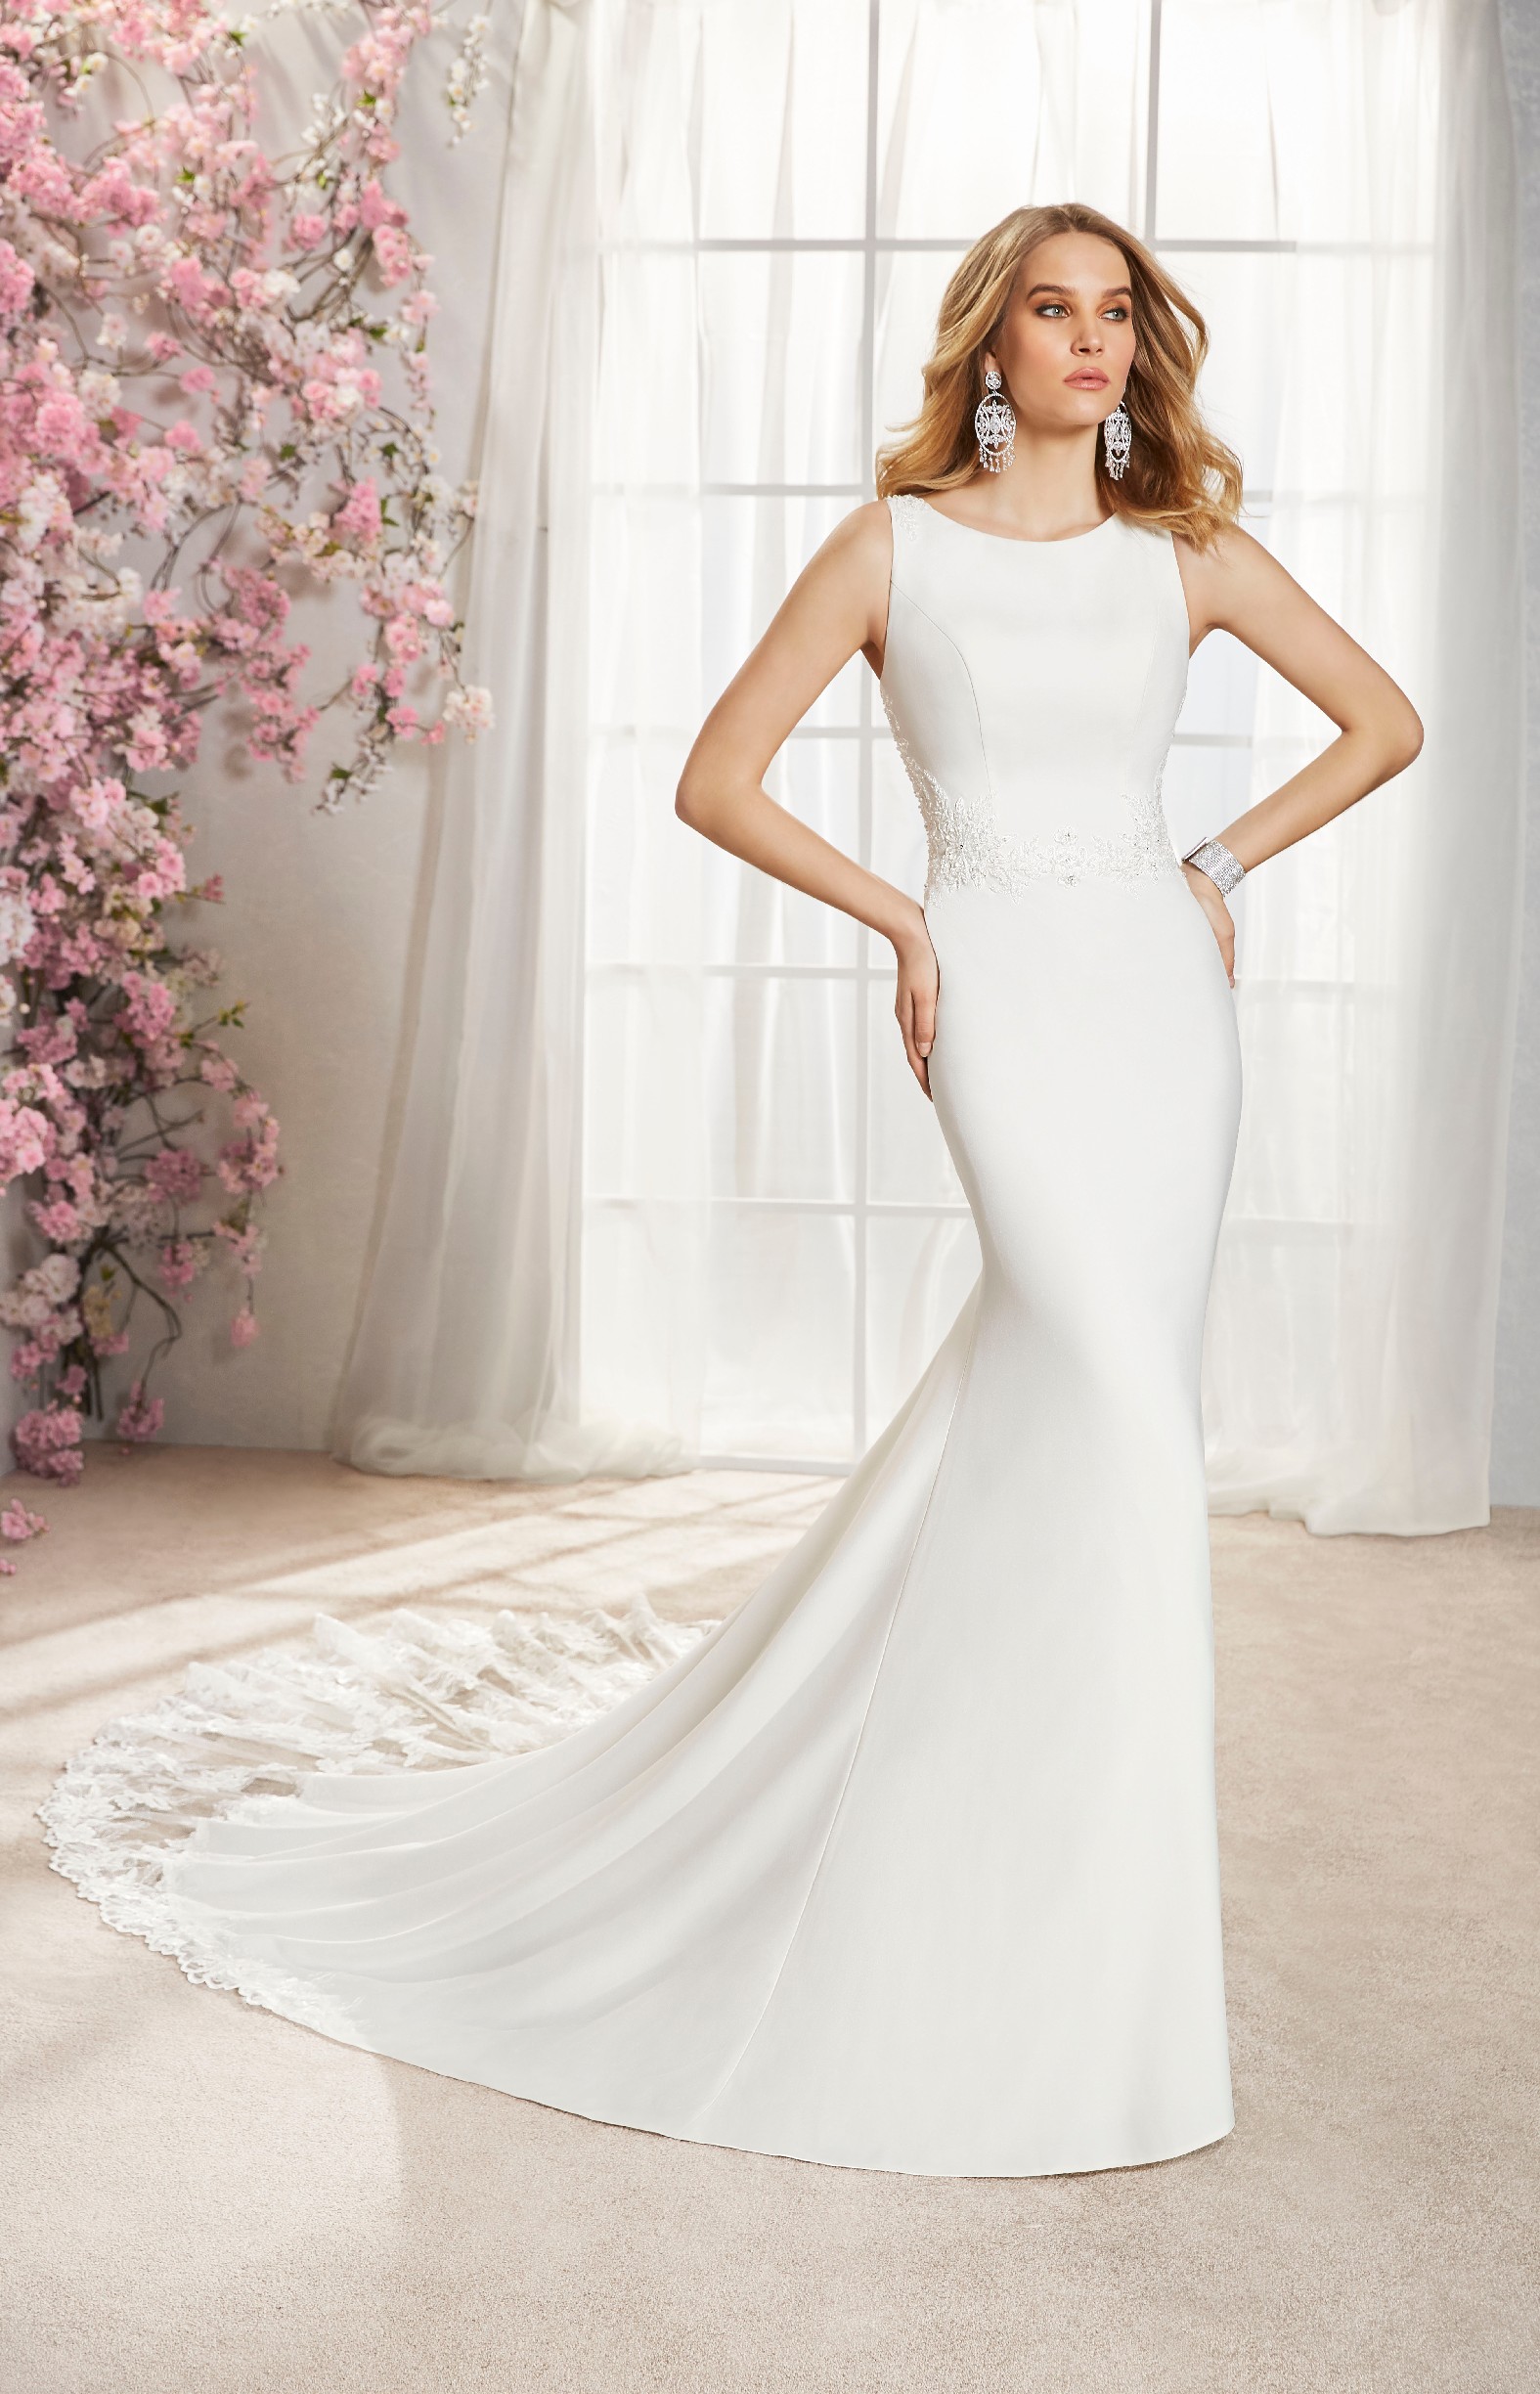 Model wears Ronald Joyce wedding dress style 18364 – a classic fit and flare dress with a high neck that’s perfect for brides who need a wedding dress quickly.